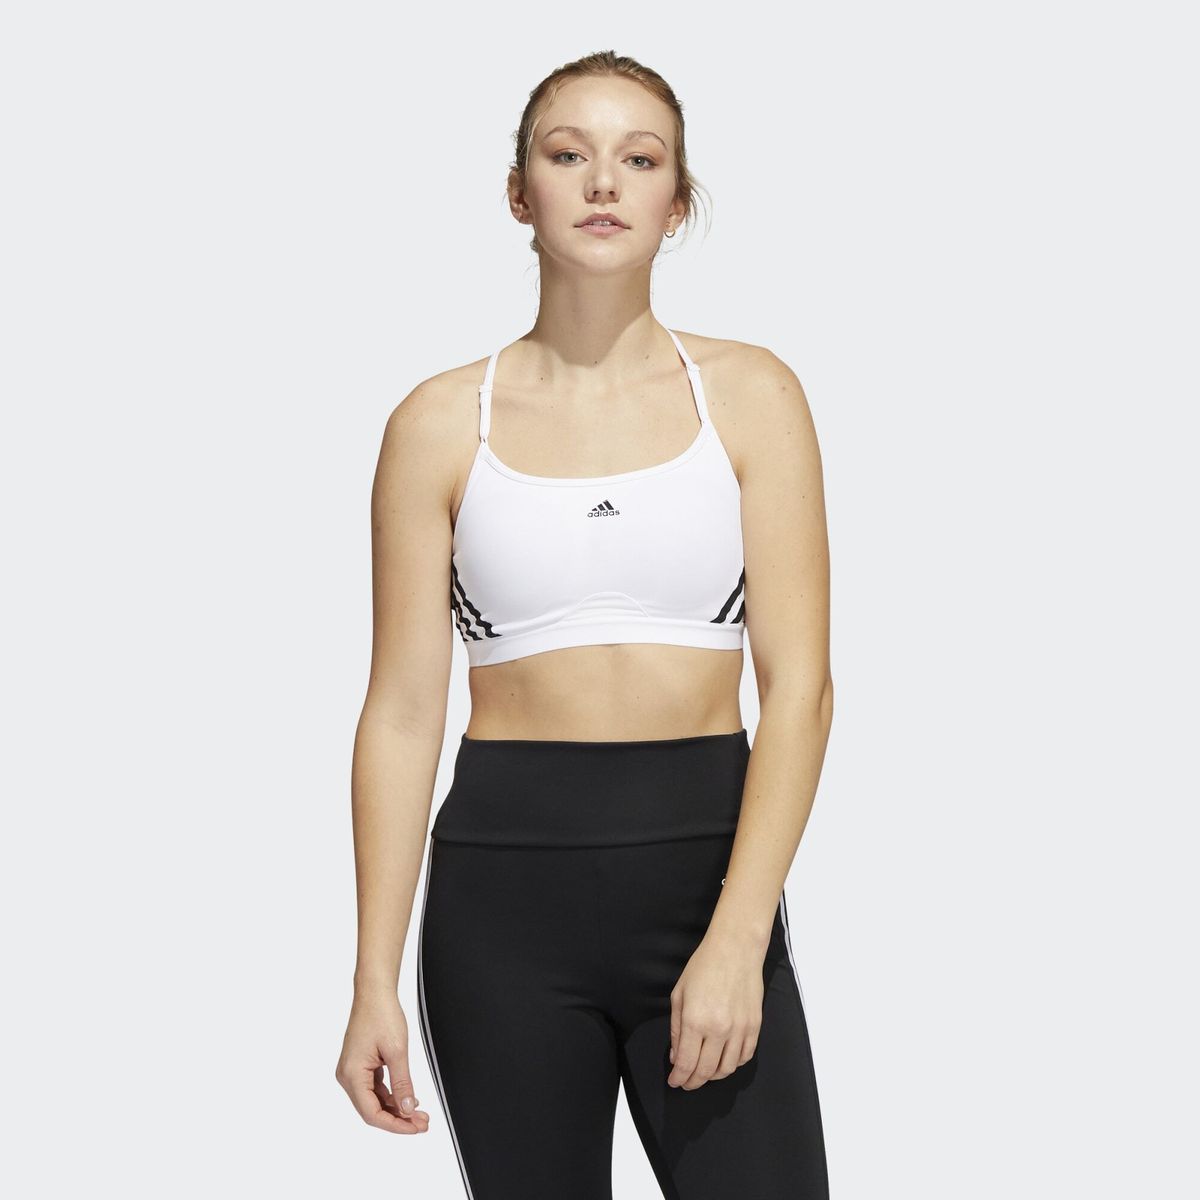 Brassière adidas TLRD Move Training Maintien fort